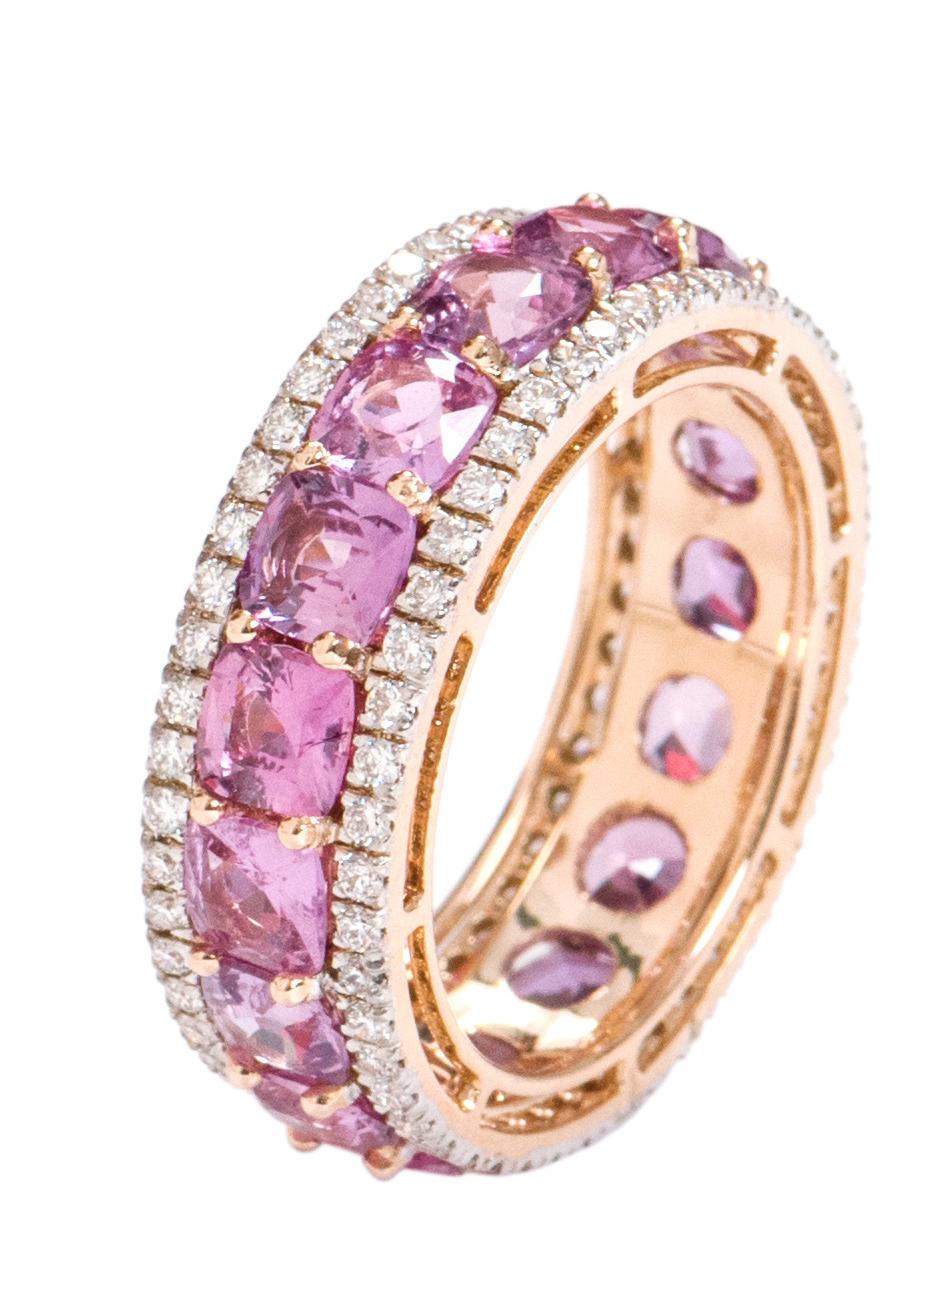 18 Karat Rose Gold 6.82 Carat Pink Sapphire and Diamond Eternity Band Ring

This sensational rose vivid pink sapphire and diamond band is exquisite. The solitaire horizontally placed perfect cushion shape pink sapphires in a shared grain prong